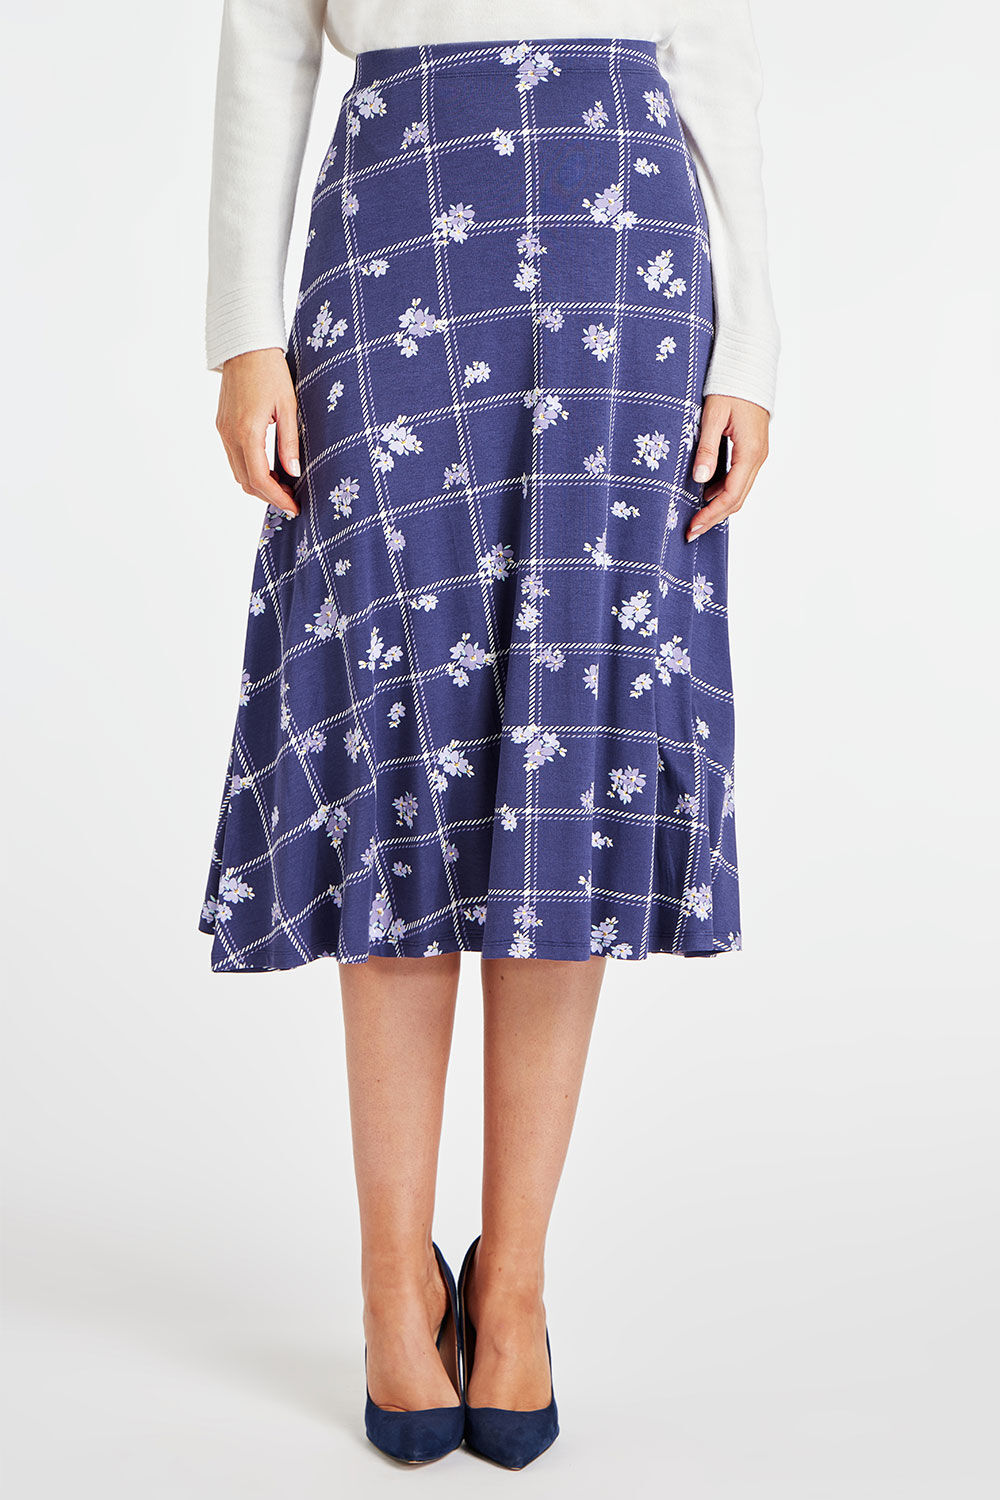 Bonmarche Navy Checked Floral Print Jersey Elasticated Flippy Skirt, Size: 10